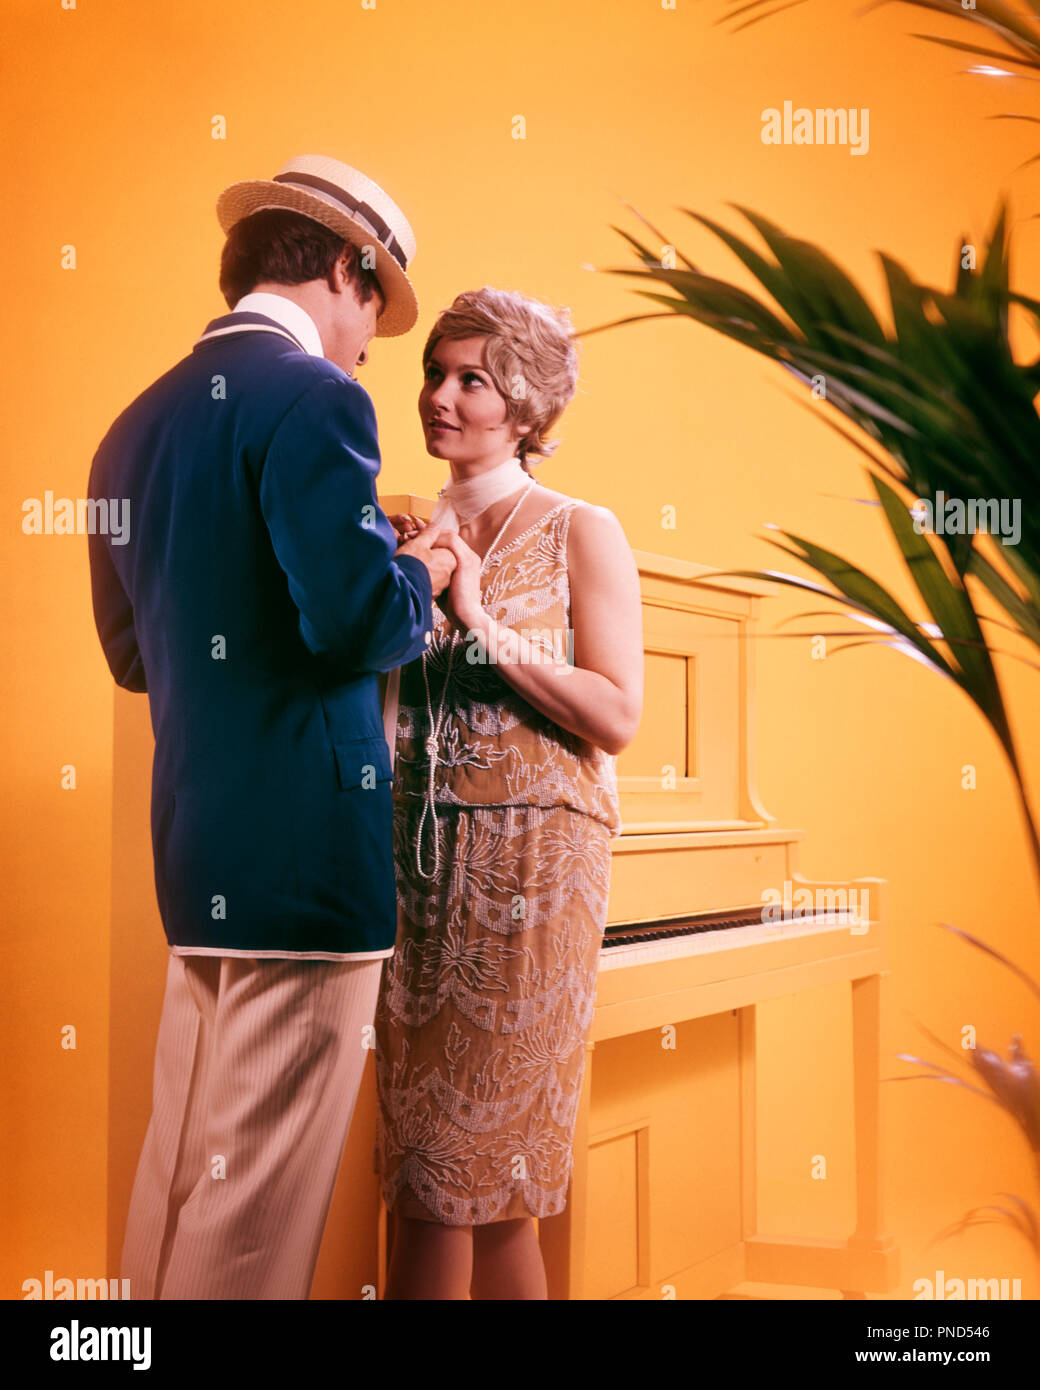 1970s COUPLE MAN WOMAN WEARING 1920s ERA JAZZ AGE CLOTHES HOLDING HANDS STANDING BY PAINTED YELLOW UPRIGHT PIANO  - ks8928 PHT001 HARS AGE COLOR STRAW OLD TIME NOSTALGIA OLD FASHION 1 STYLE COMMUNICATION BLOND YOUNG ADULT SEXY TEAMWORK STRONG COSTUMES JOY LIFESTYLE ACTOR FEMALES MARRIED SPOUSE HUSBANDS HOME LIFE FRIENDSHIP FULL-LENGTH HALF-LENGTH LADIES PERSONS INSPIRATION CARING CHARACTER MALES BLAZER ENTERTAINMENT PERFORMING ARTS UPRIGHT HAPPINESS JAZZ LEISURE PERFORMER STYLES MELODRAMA CHARACTERS CHOICE EXCITEMENT BY ENTERTAINER PAINTED CONNECTION ACTORS DRAMA STYLISH PERSONAL ATTACHMENT Stock Photo